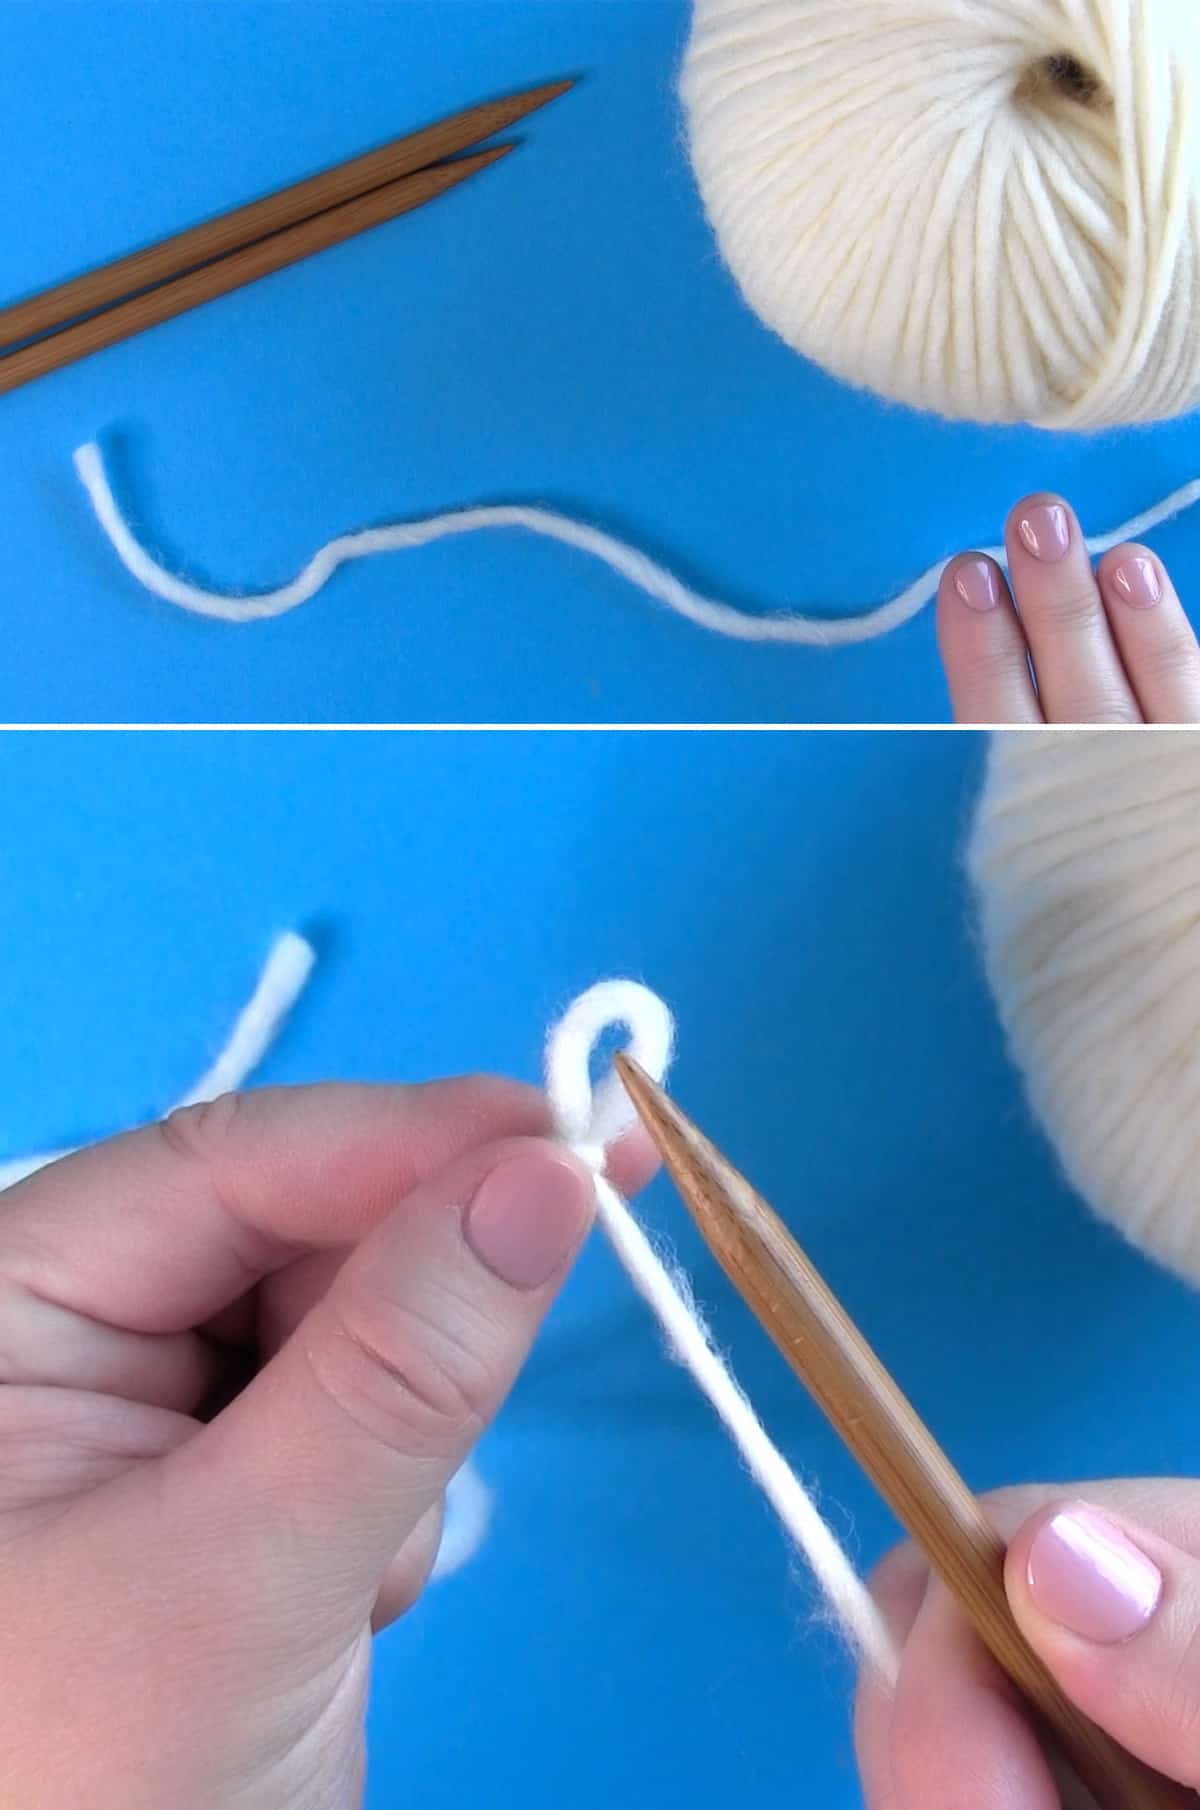 Yarn, knitting needles, and hands preparing to cast on stitches with yarn tail on the left and ball on the right, then make a slip knot.